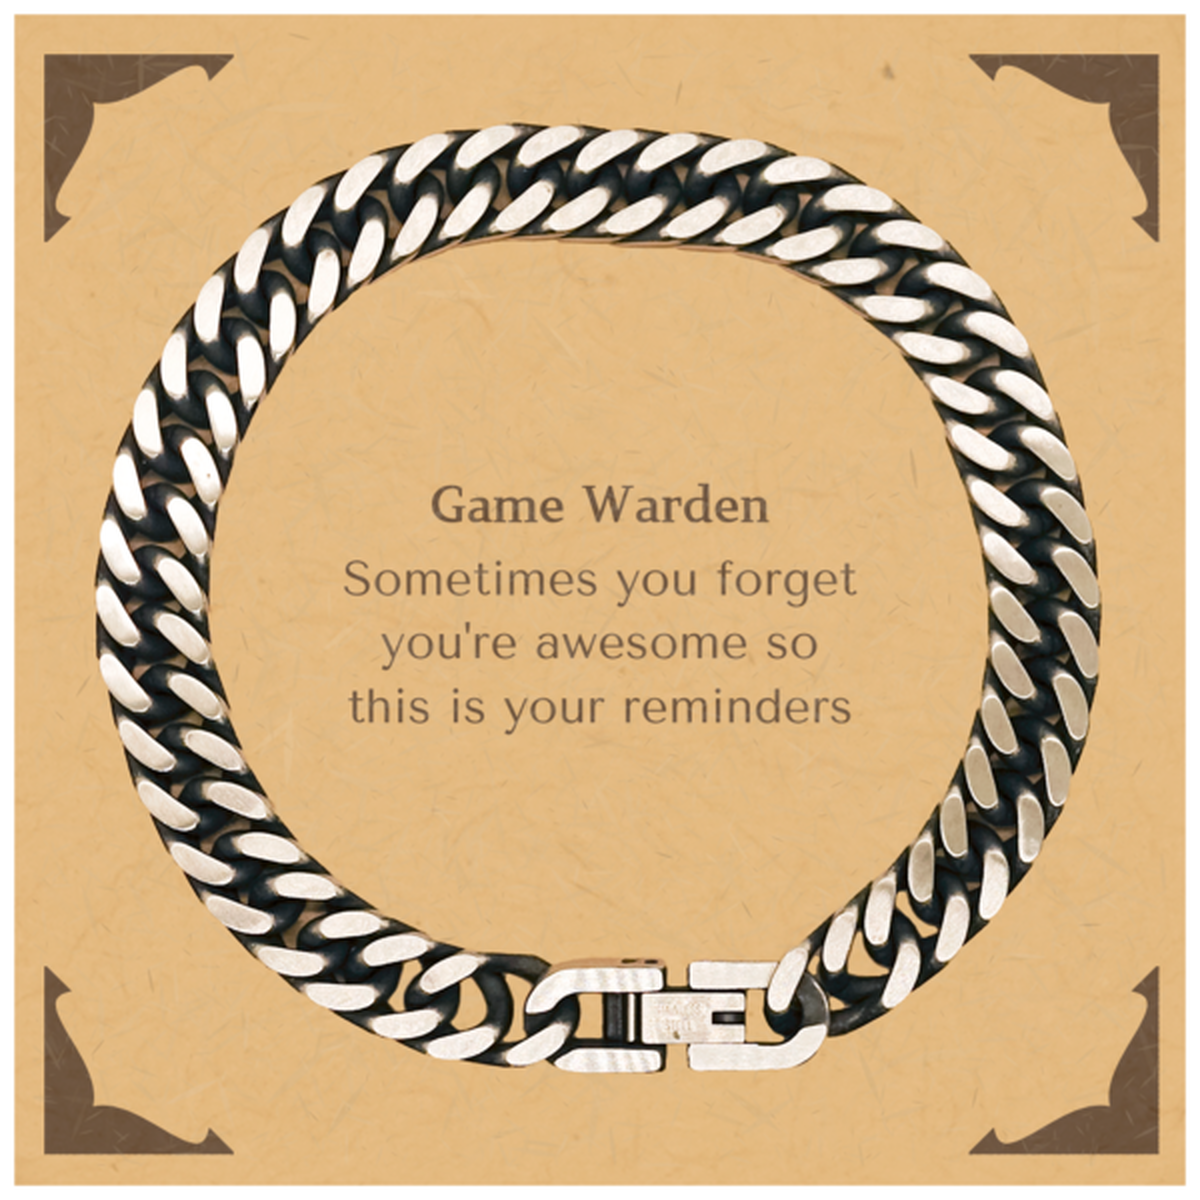 Sentimental Game Warden Cuban Link Chain Bracelet, Game Warden Sometimes you forget you're awesome so this is your reminders, Graduation Christmas Birthday Gifts for Game Warden, Men, Women, Coworkers